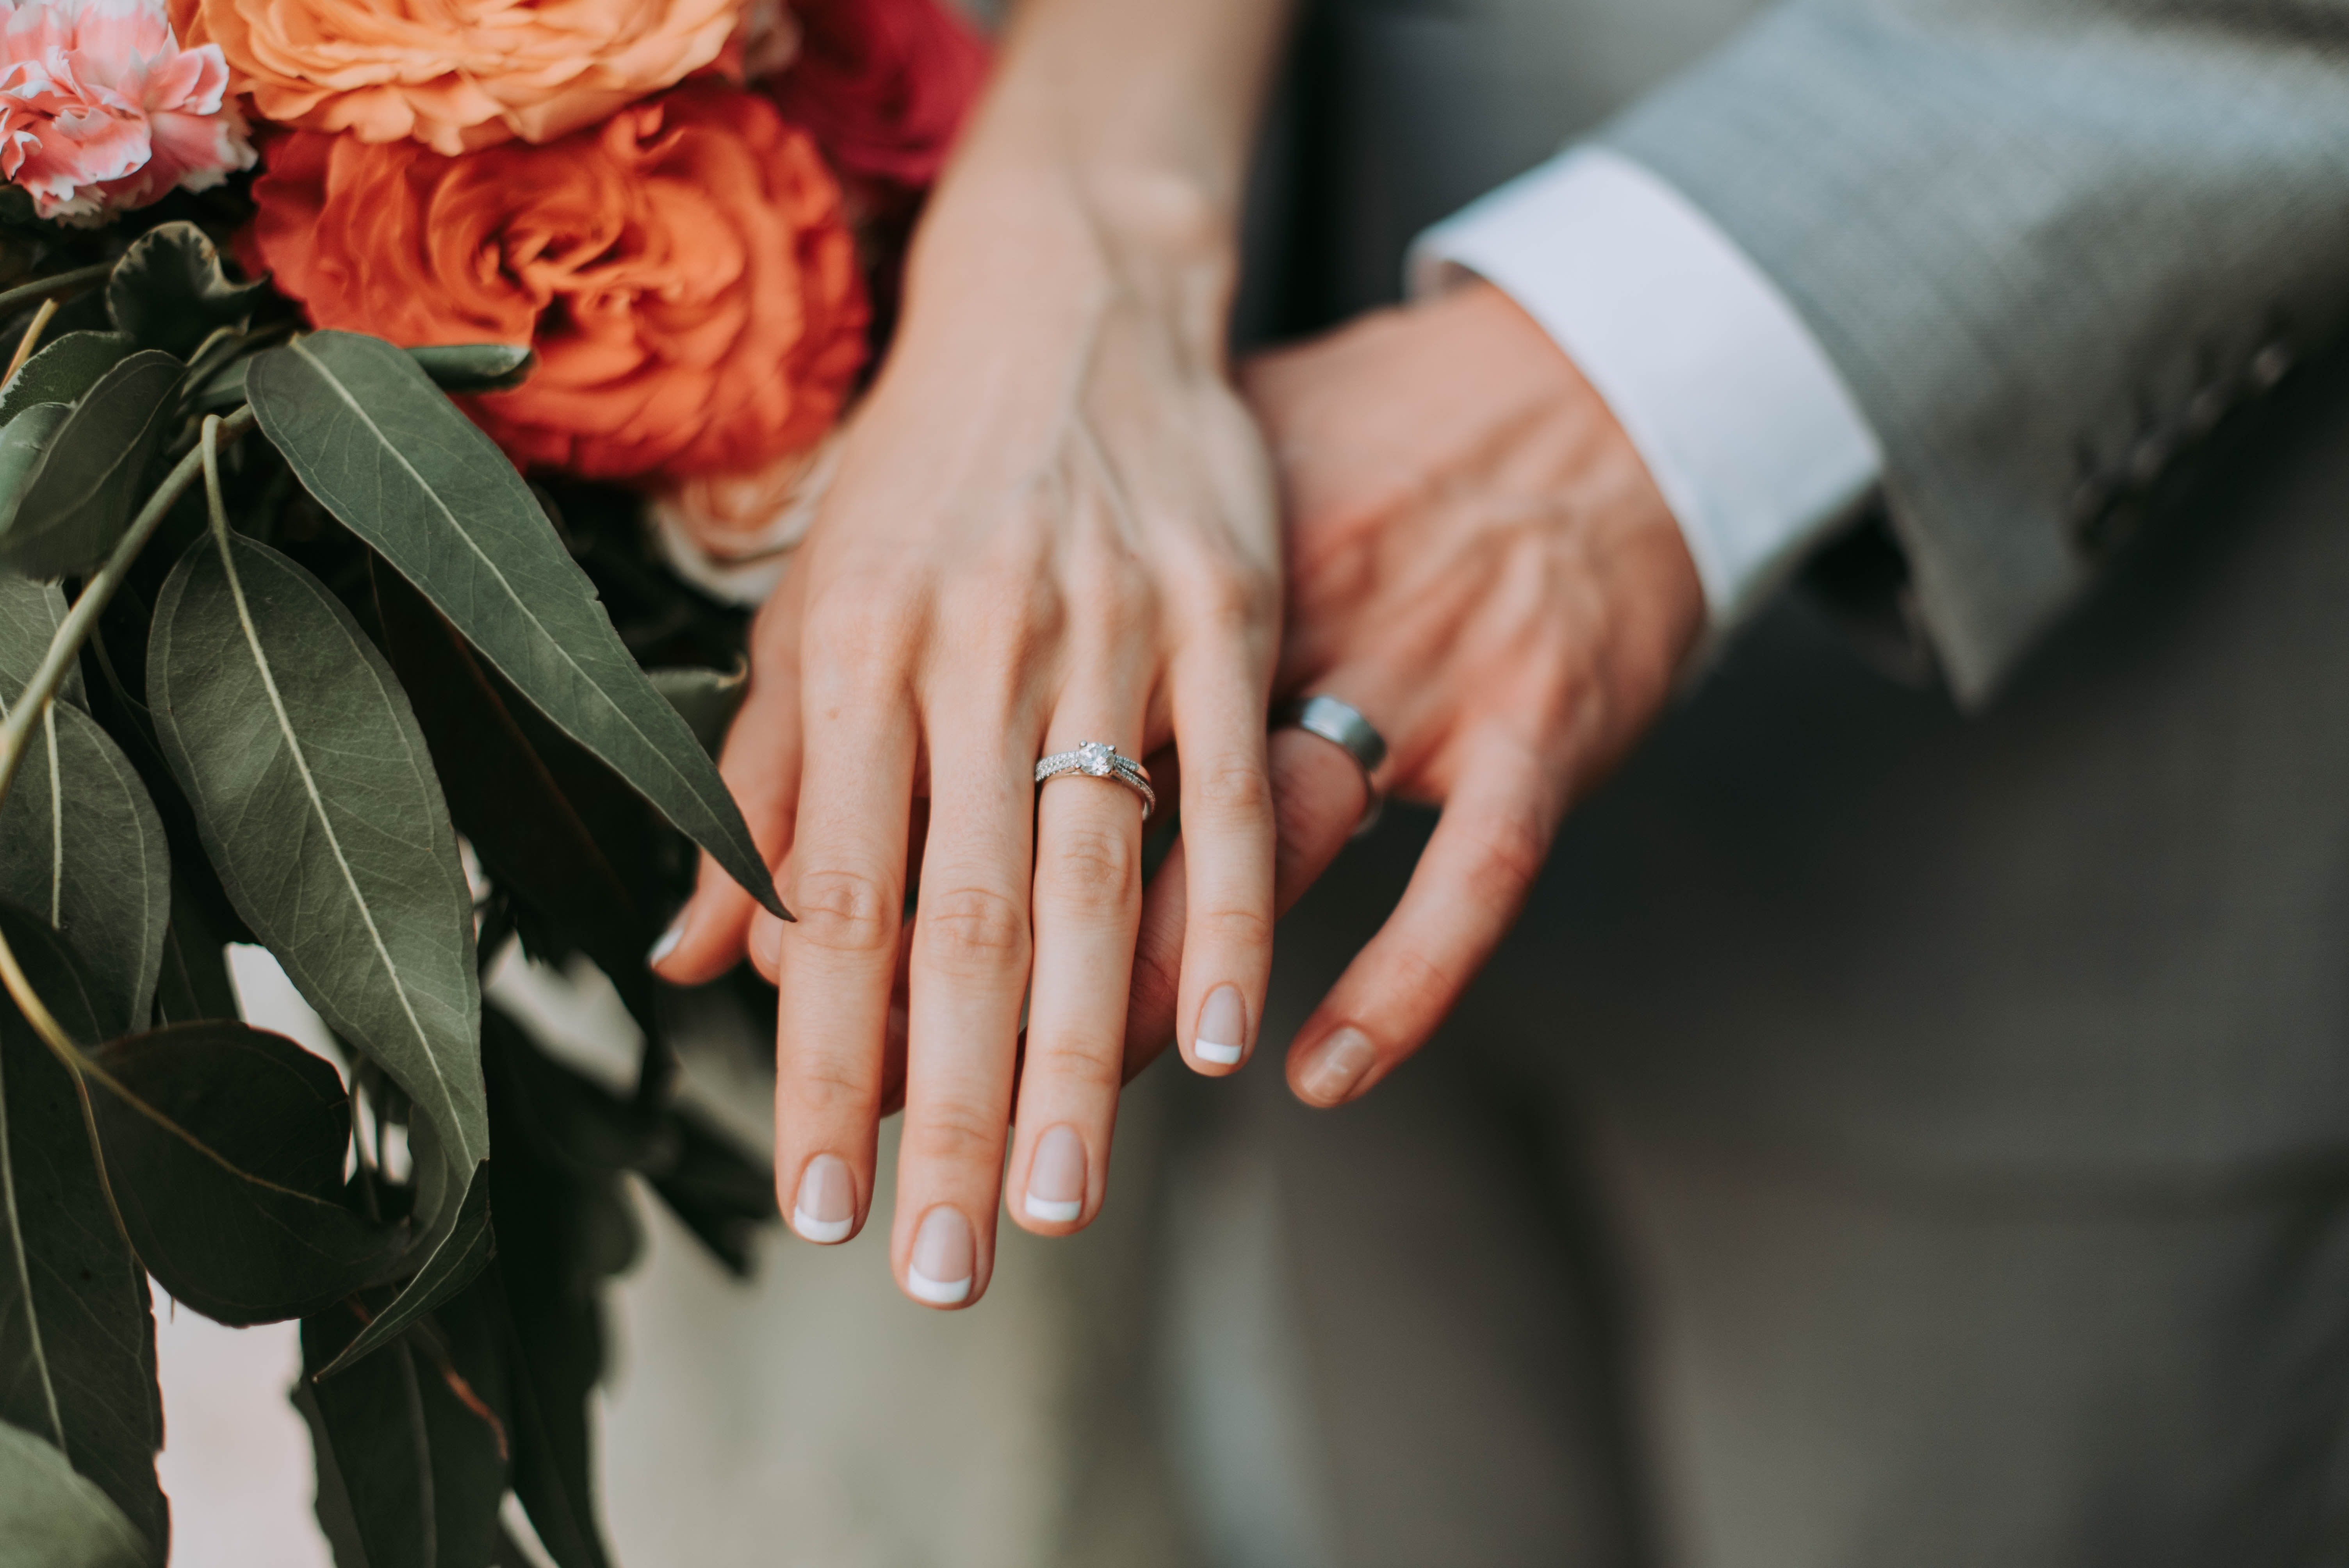 Some lashed out at OP saying wedding rings don't just technically represent one's relationship status | Photo: Unsplash